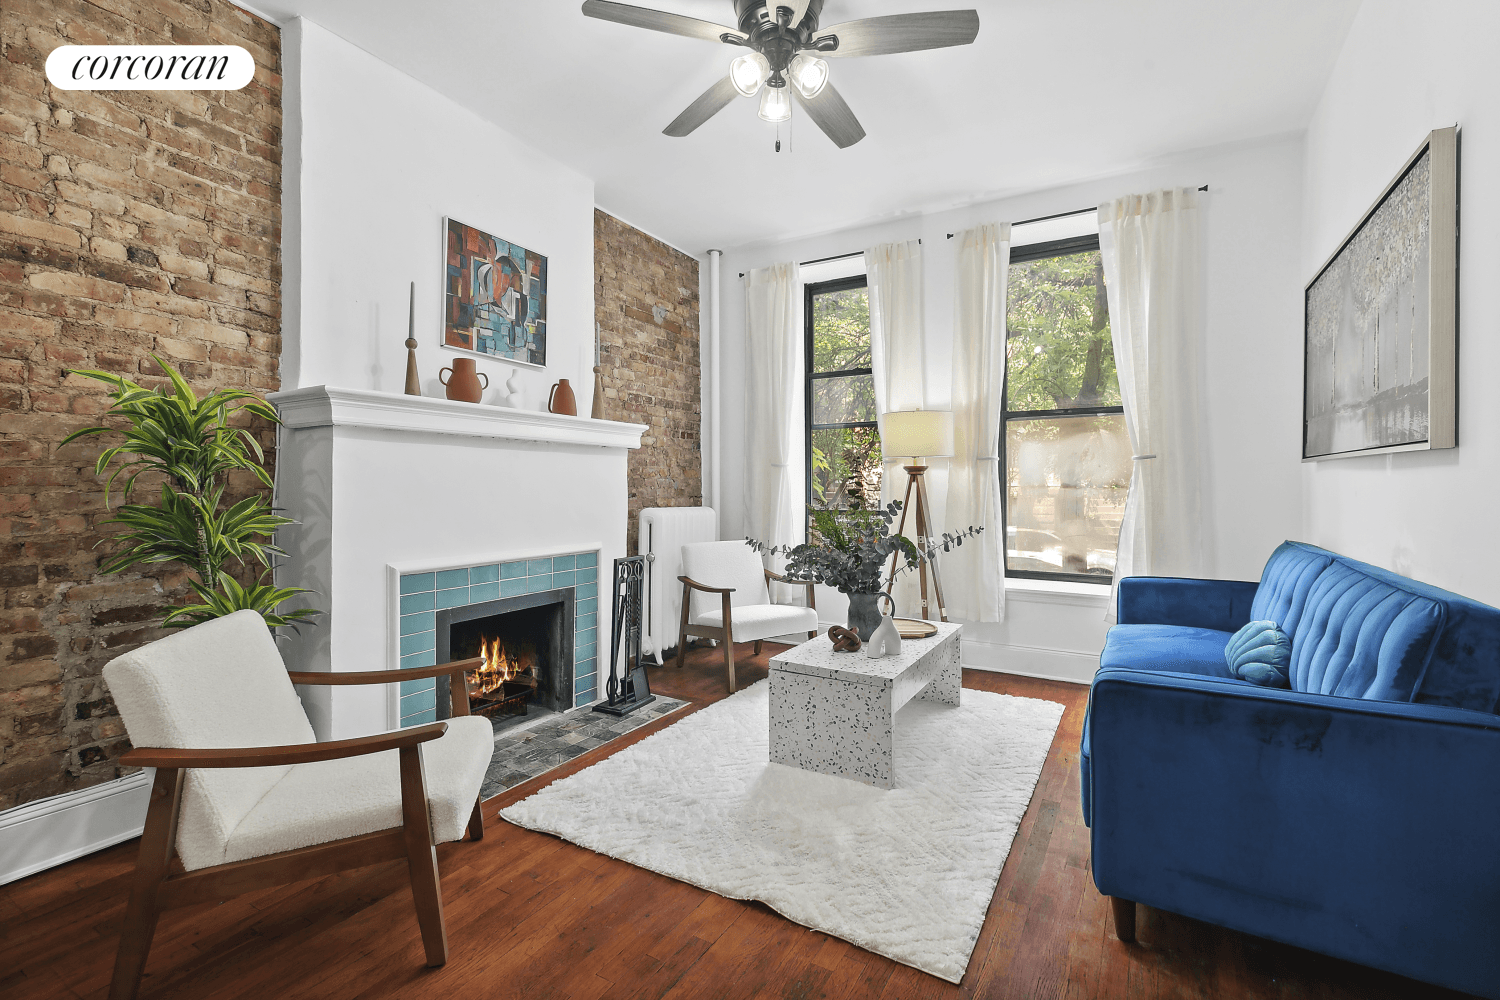 Welcome home to 656 Carroll Street, Residence 1R, a parlor level, 2 bedroom floor through co op with large private yard garden in prime Park Slope.